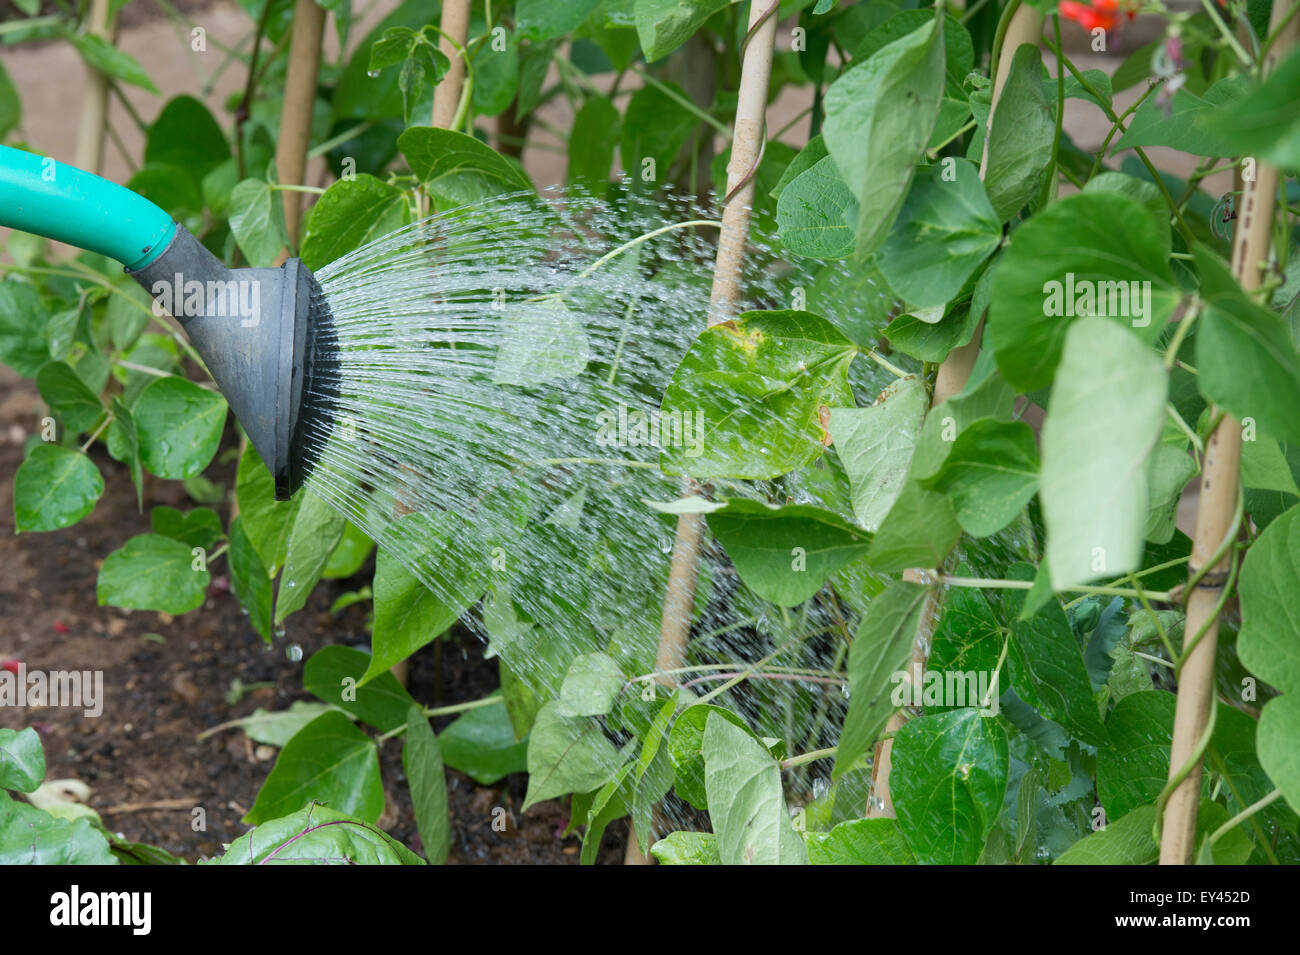 Watering runner beans with a watering can in a vegetable garden Stock Photo